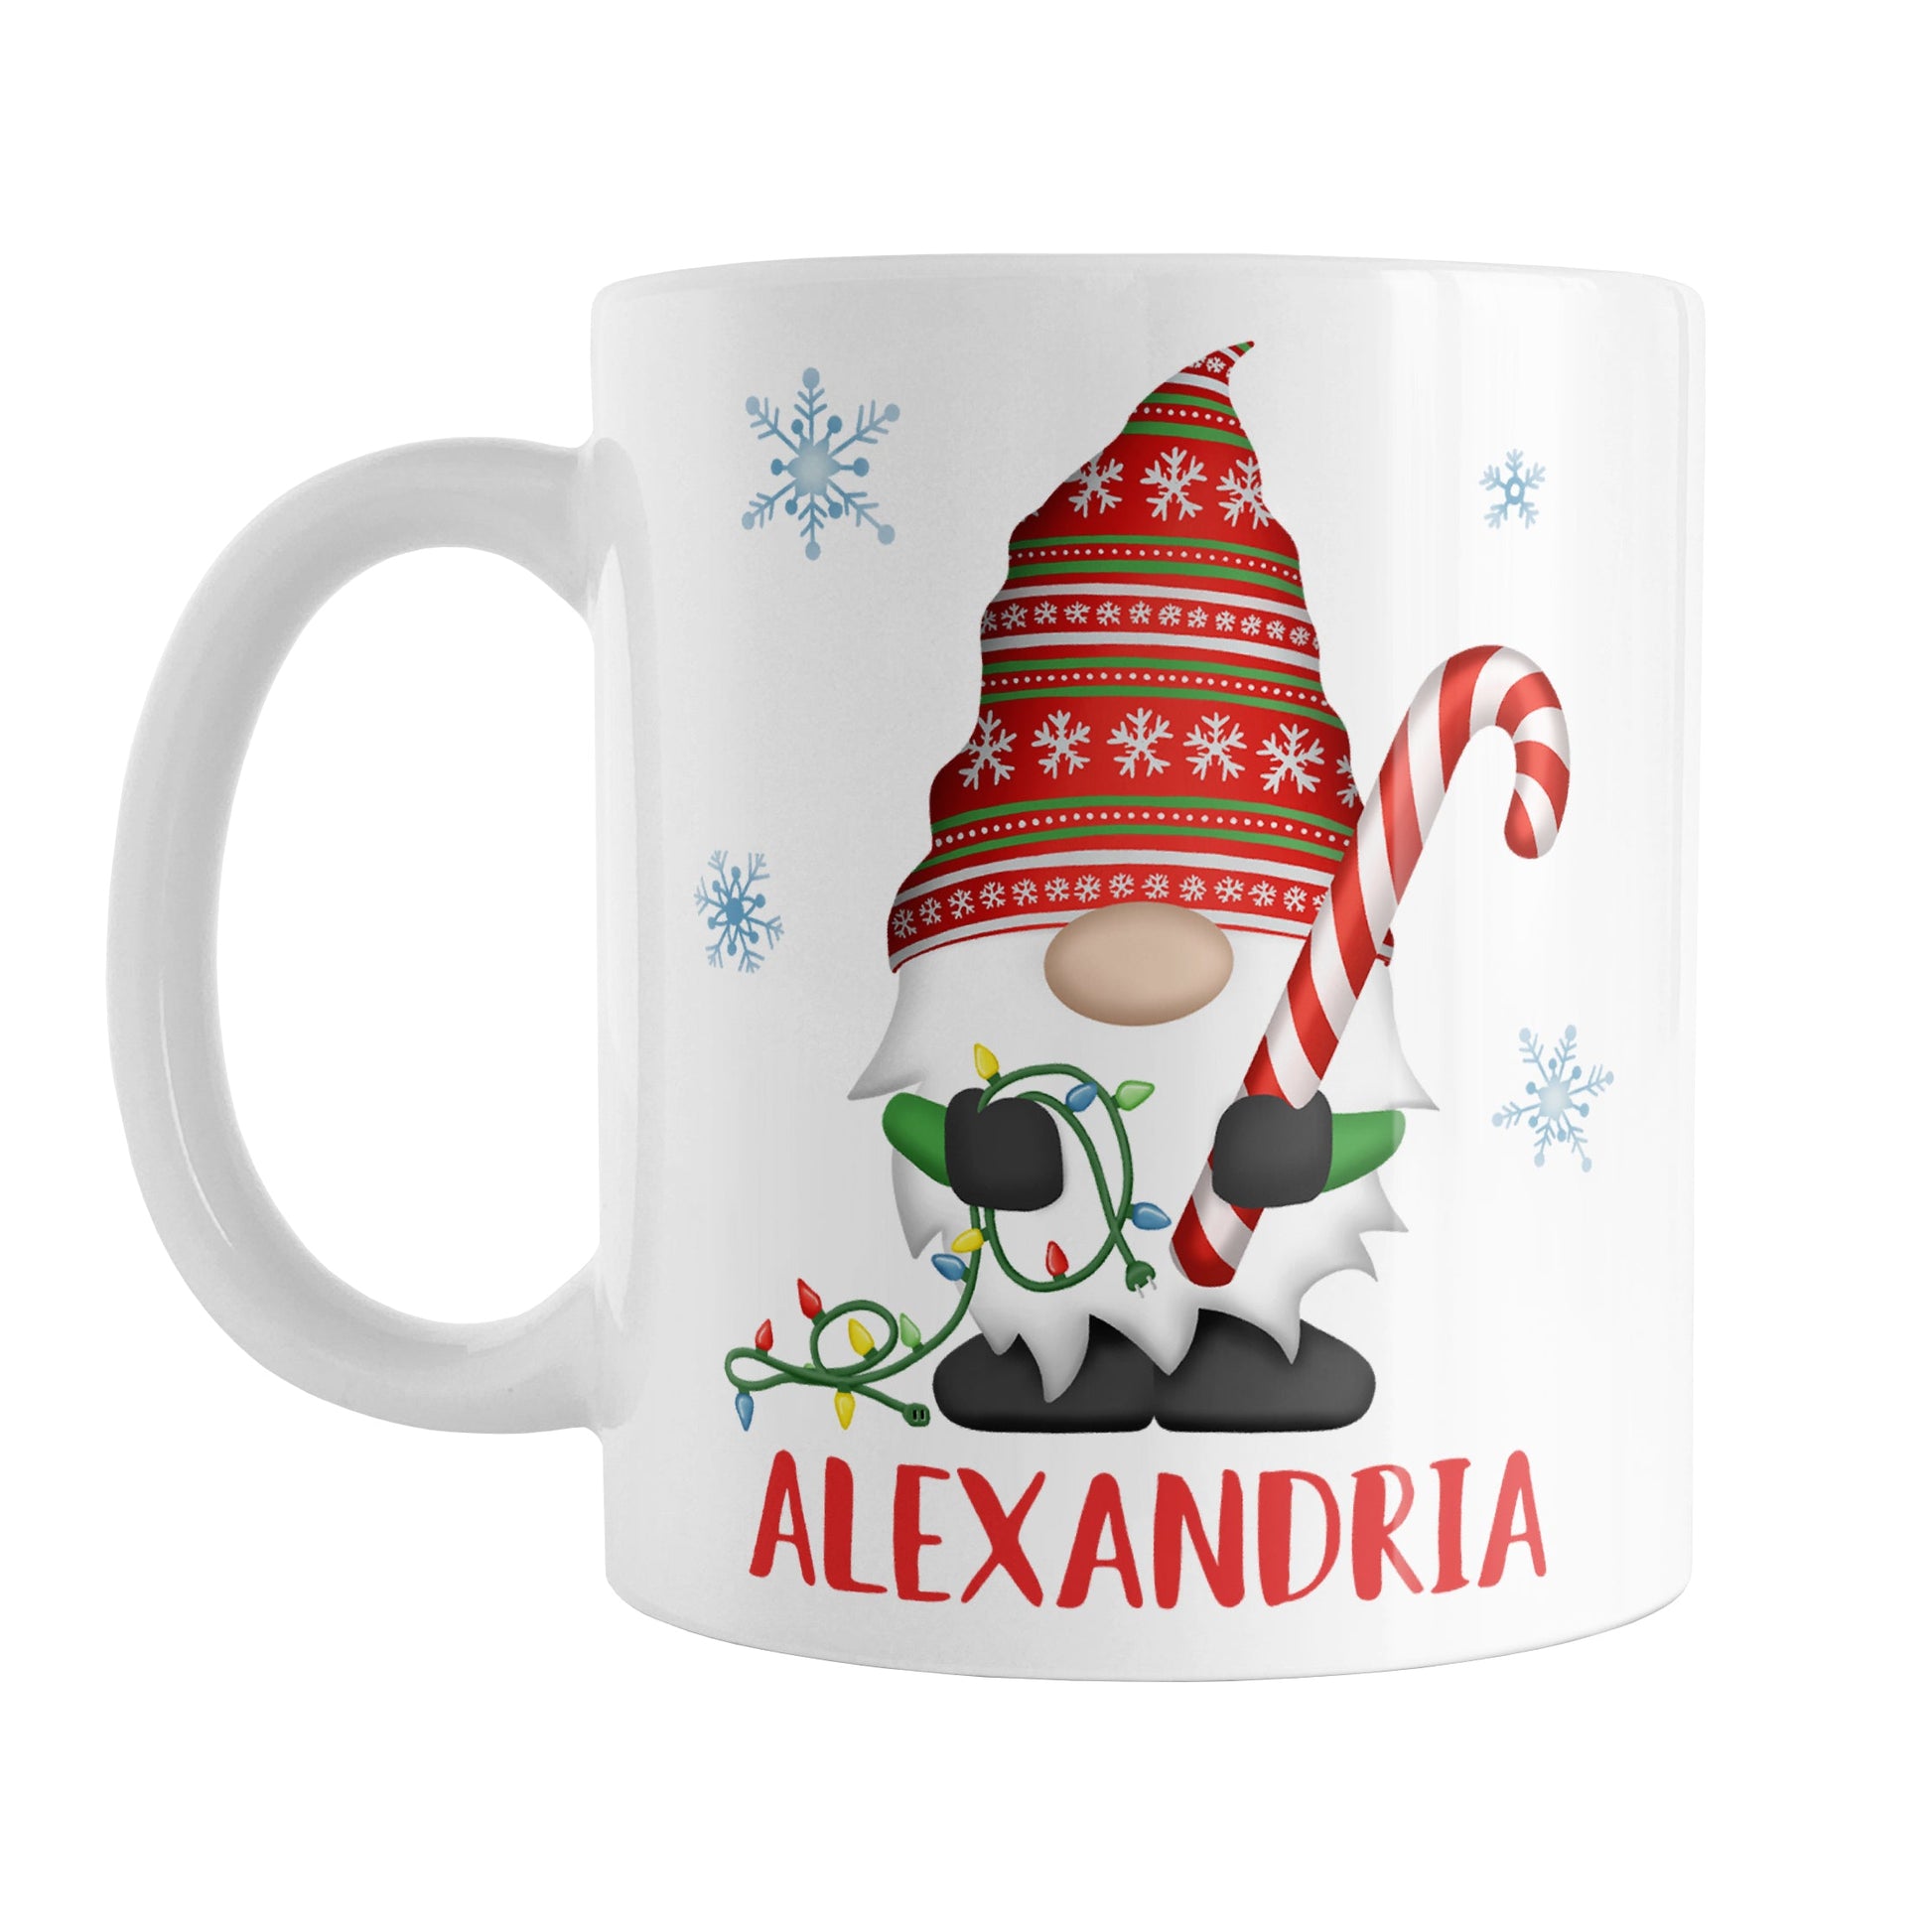 Personalized Holiday Candy Cane Gnome Mug (11oz) at Amy's Coffee Mugs. A ceramic coffee mug designed with a holiday gnome on both sides of the mug wearing a festive red and green snowflake hat and holding a large candy cane and a string of Christmas lights, with winter snowflakes around it. Your name is custom printed in red below the gnome.